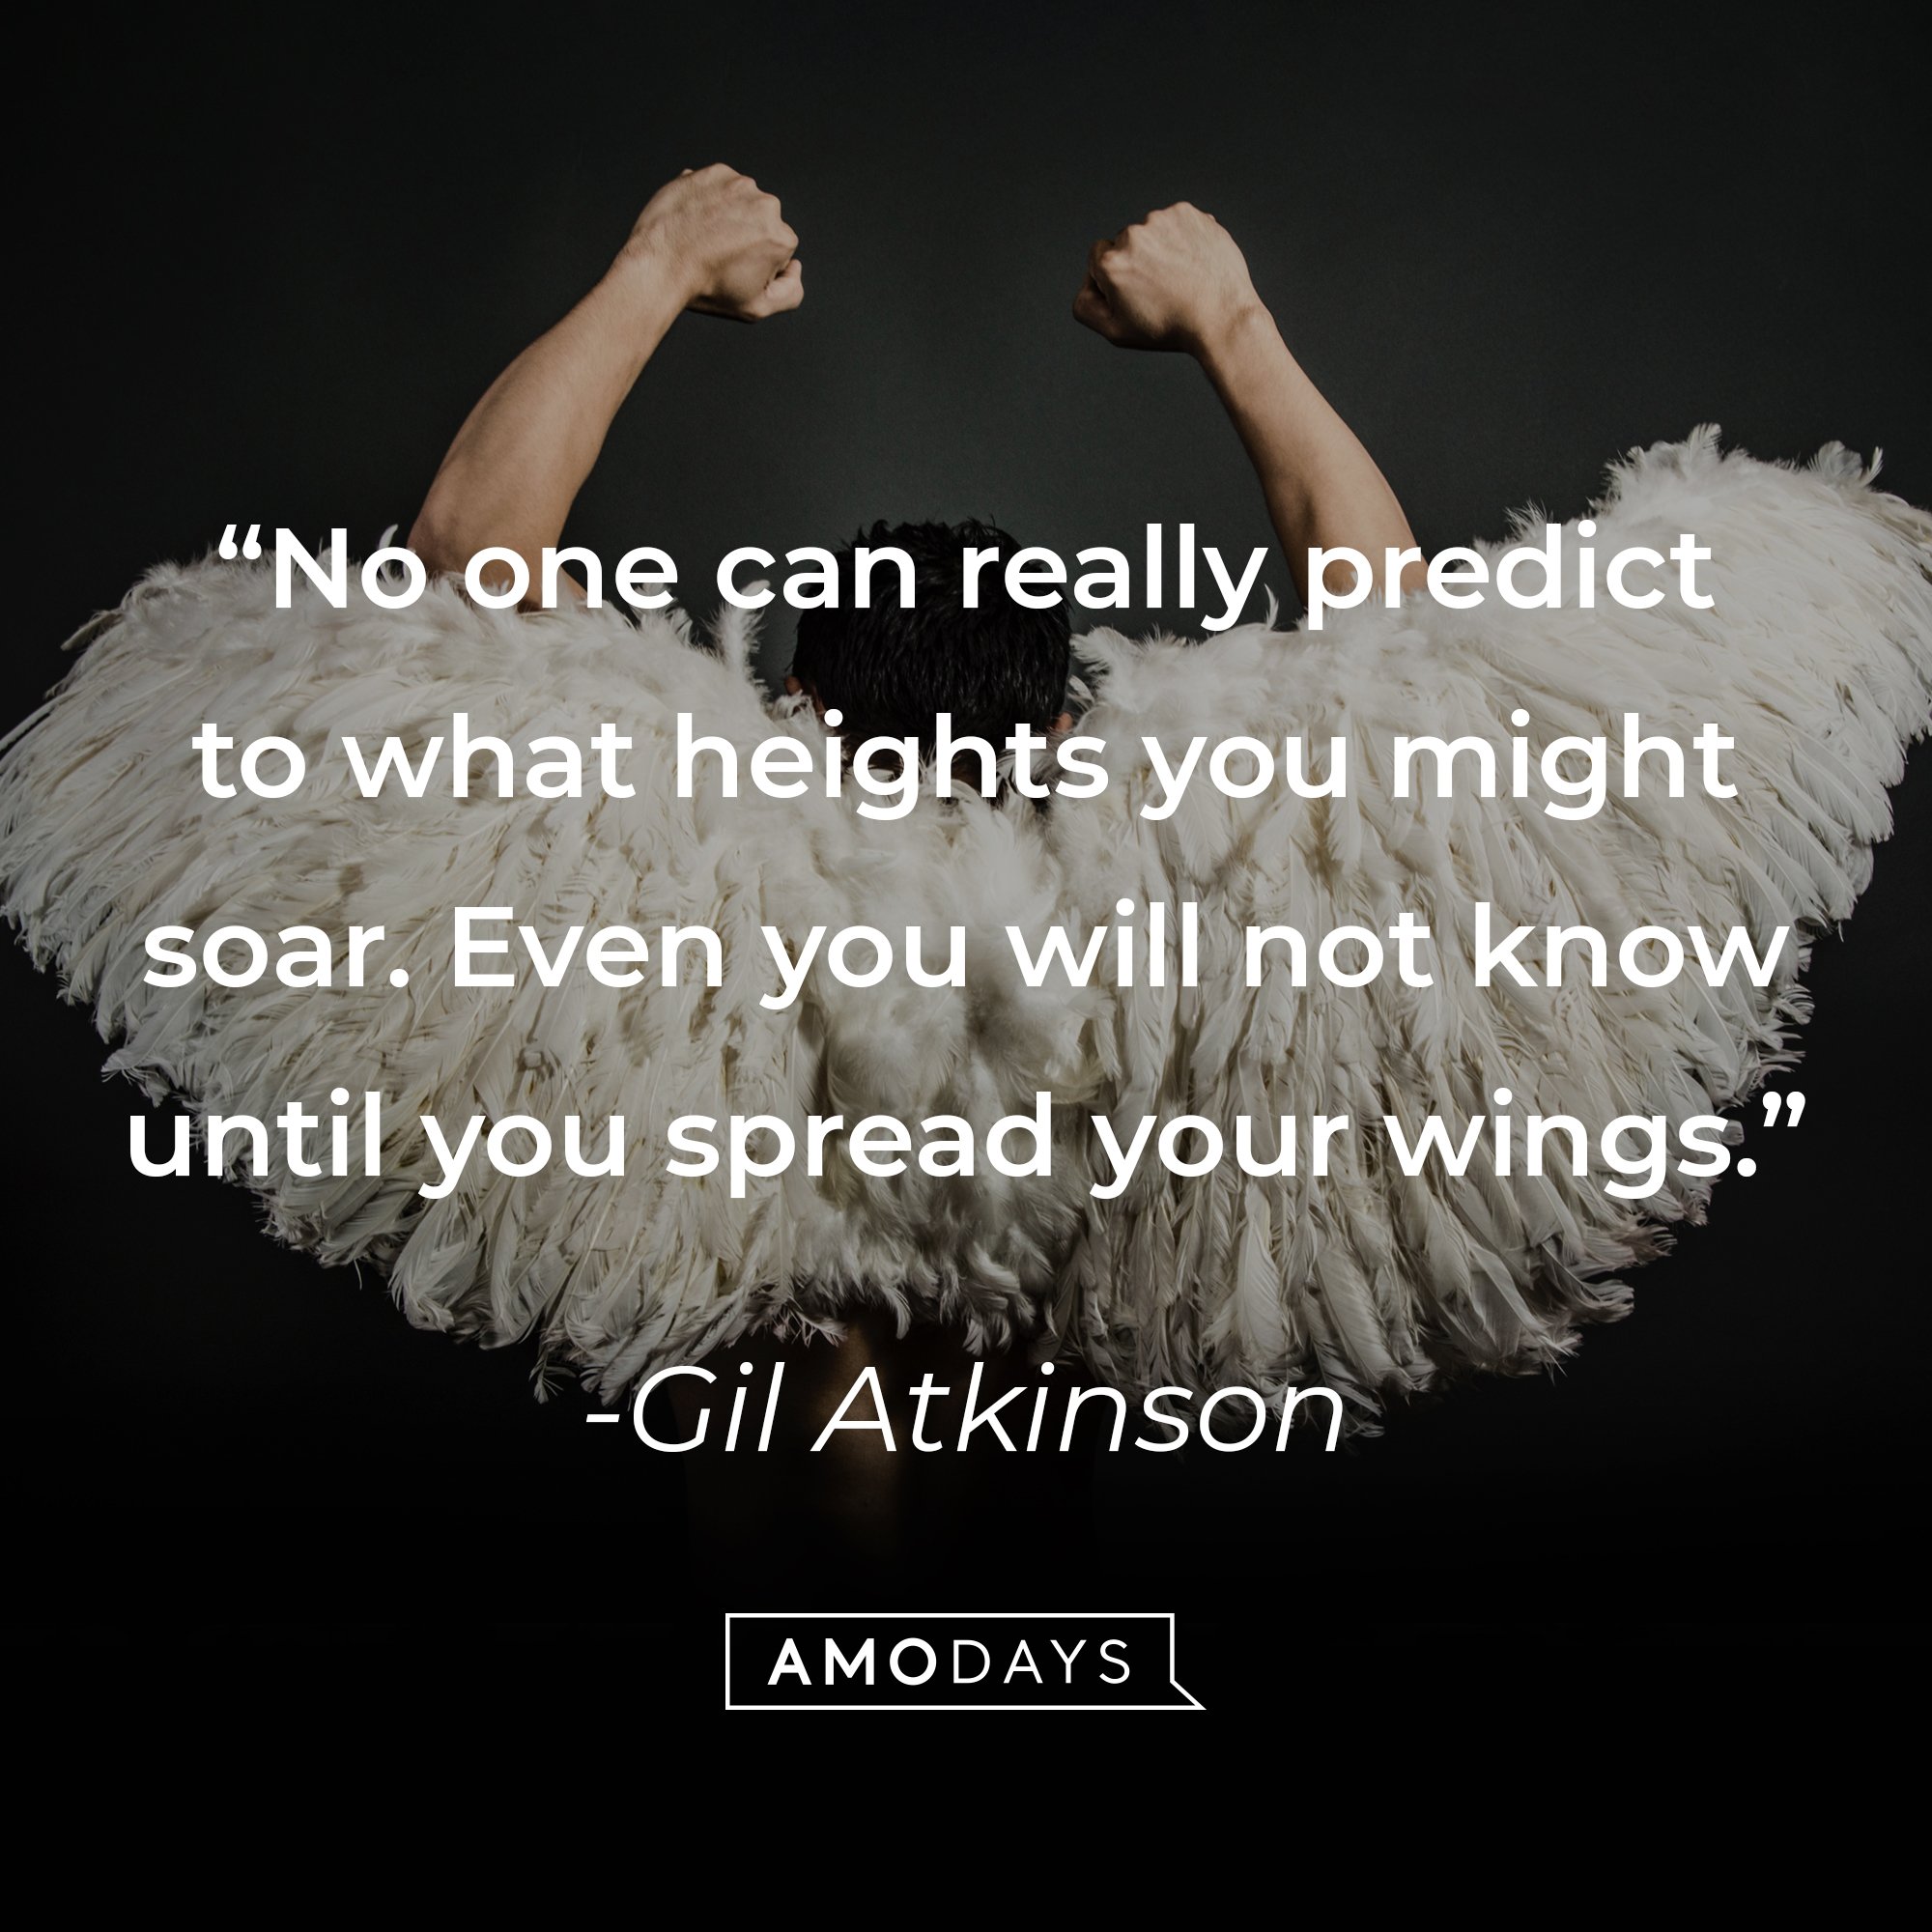 Gil Atkinson's quote: "No one can really predict to what heights you might soar. Even you will not know until you spread your wings." | Image: AmoDays